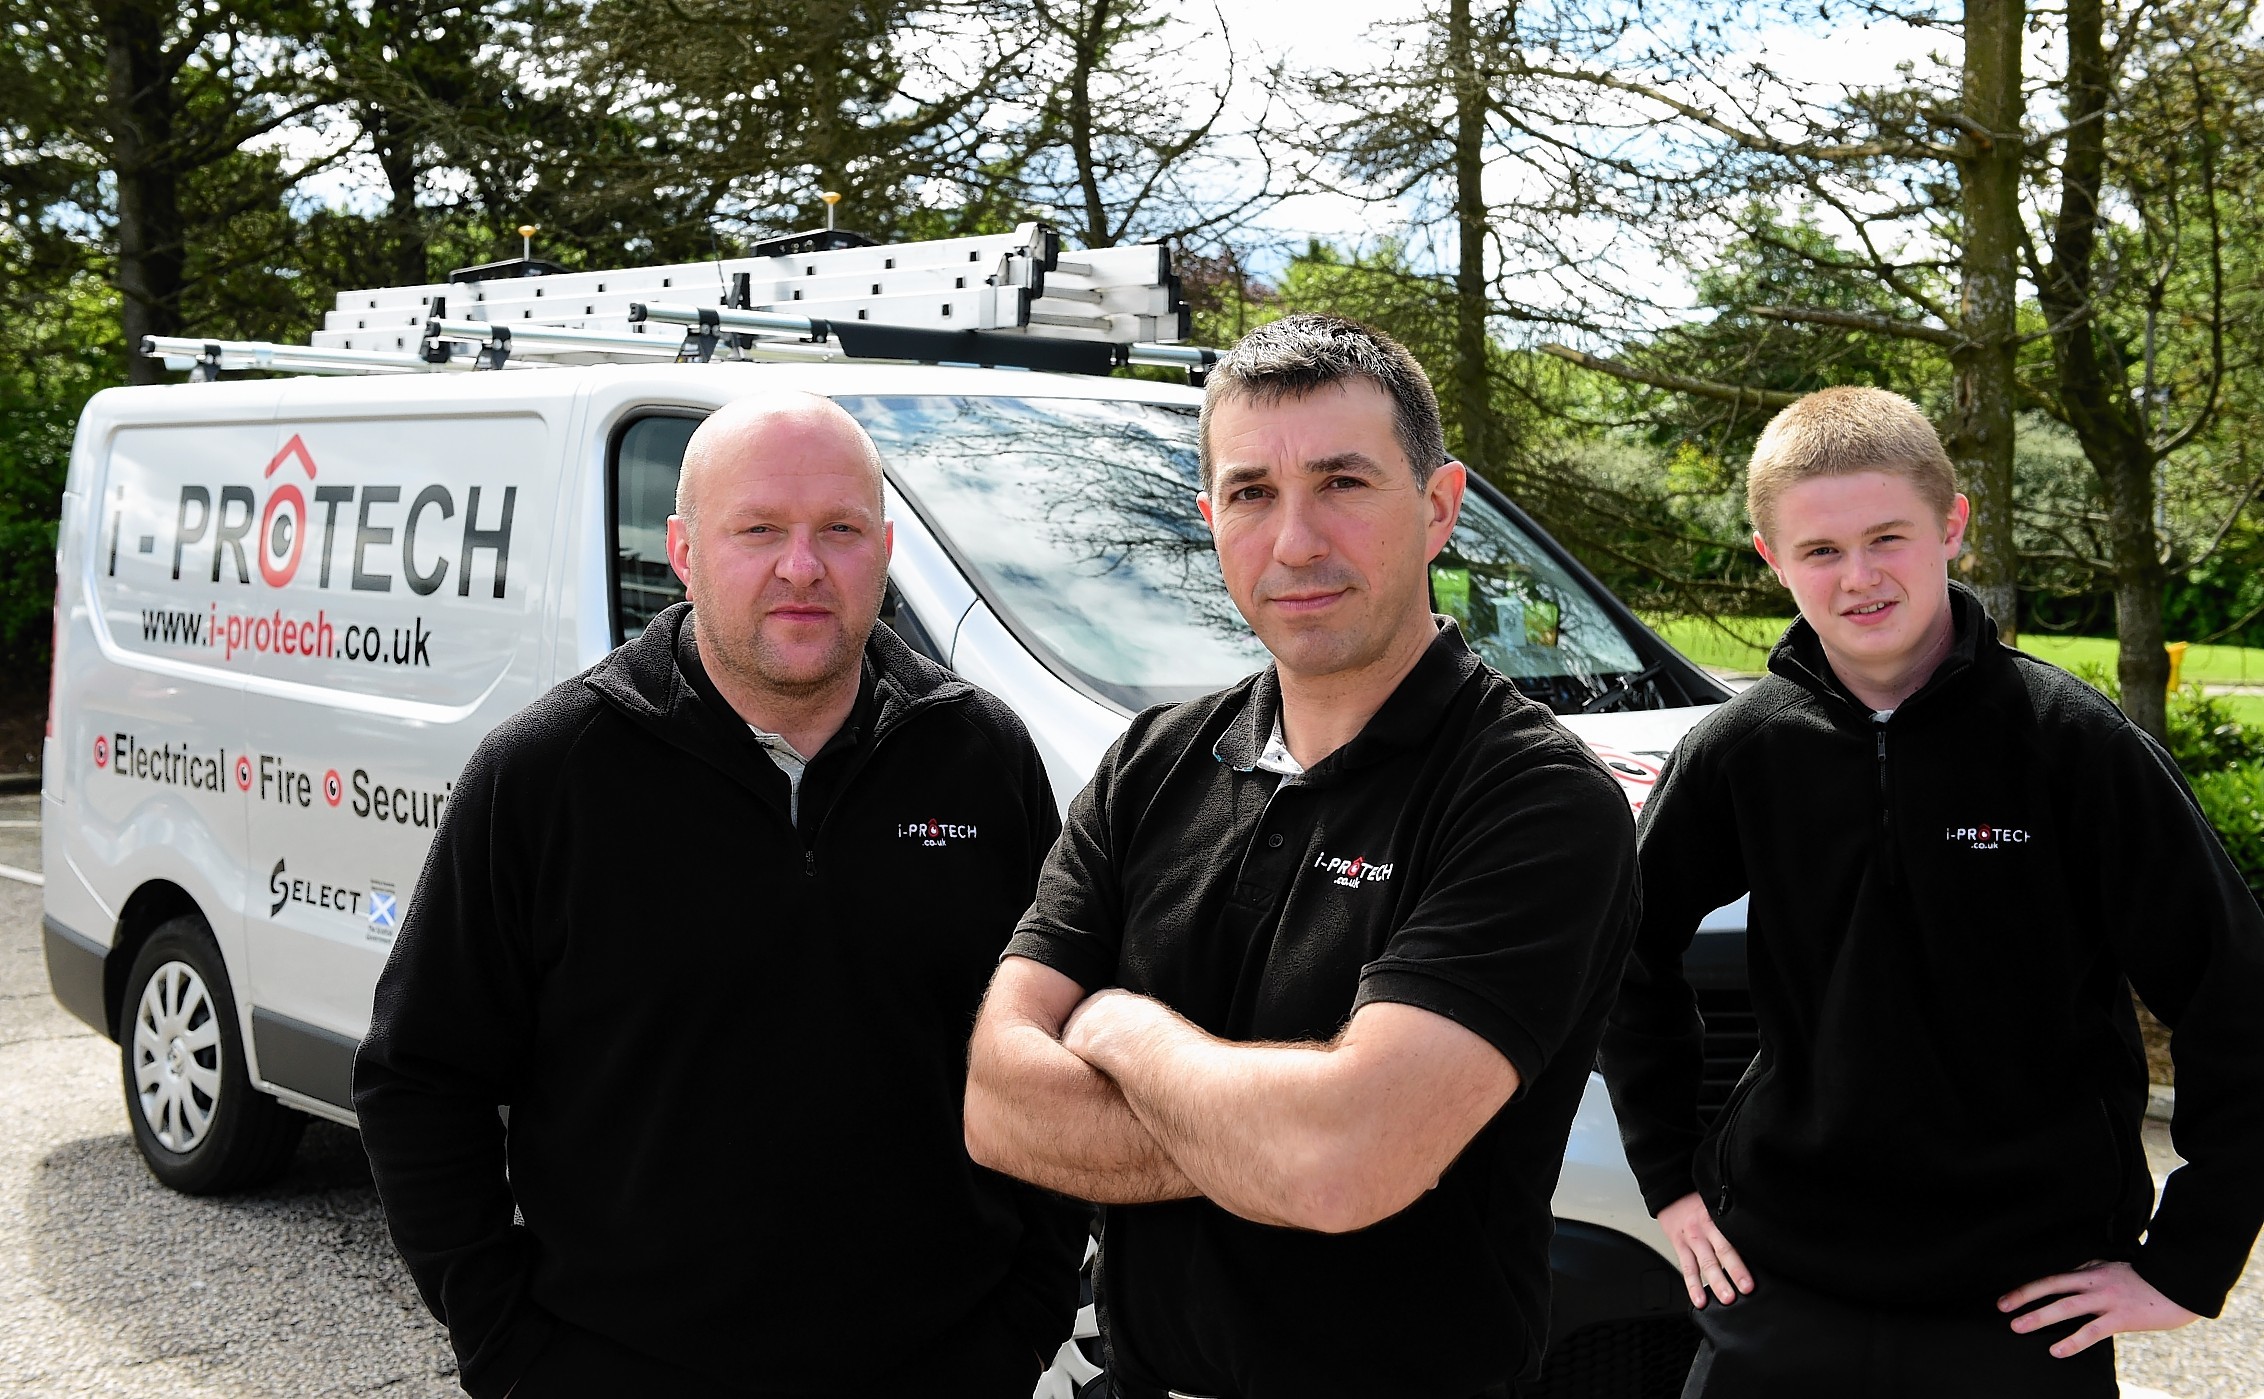 Former oil workers Stuart Munro (left) and Jim Middleton have set up a firm providing electrical and security services called i-Protect.   Also with them is apprentice Ben Thomson (right).